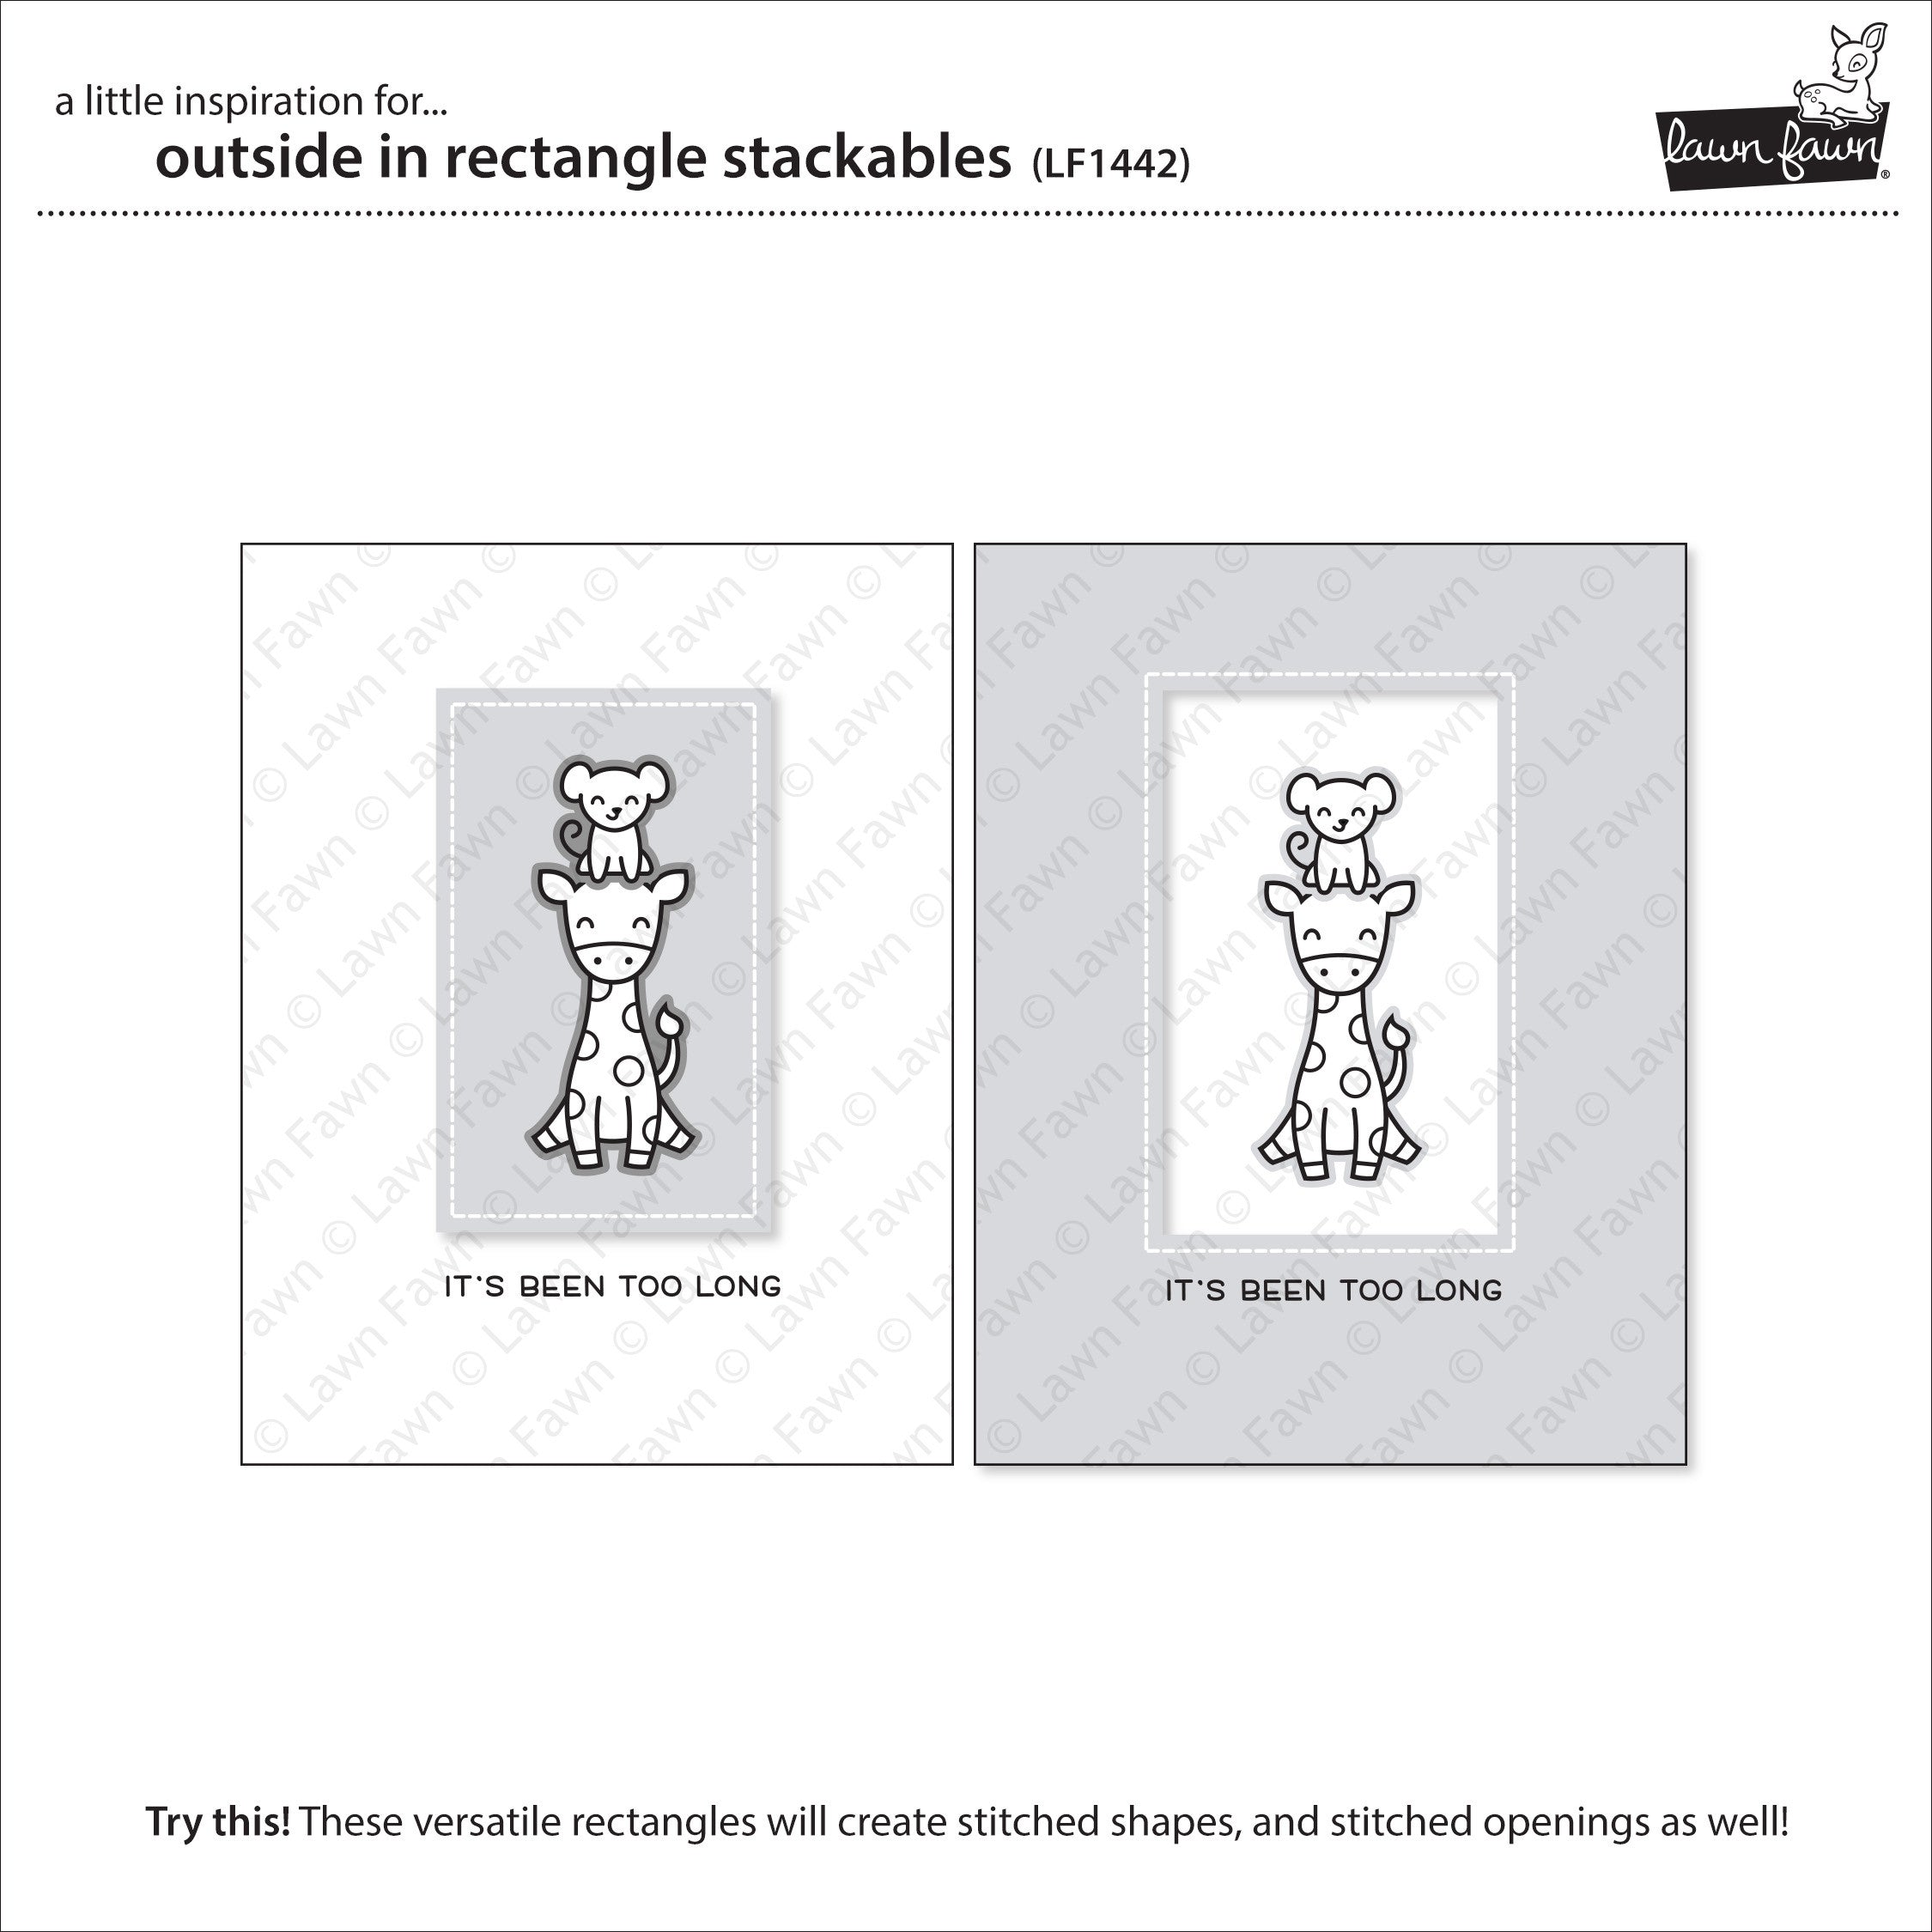 outside in stitched rectangle stackables